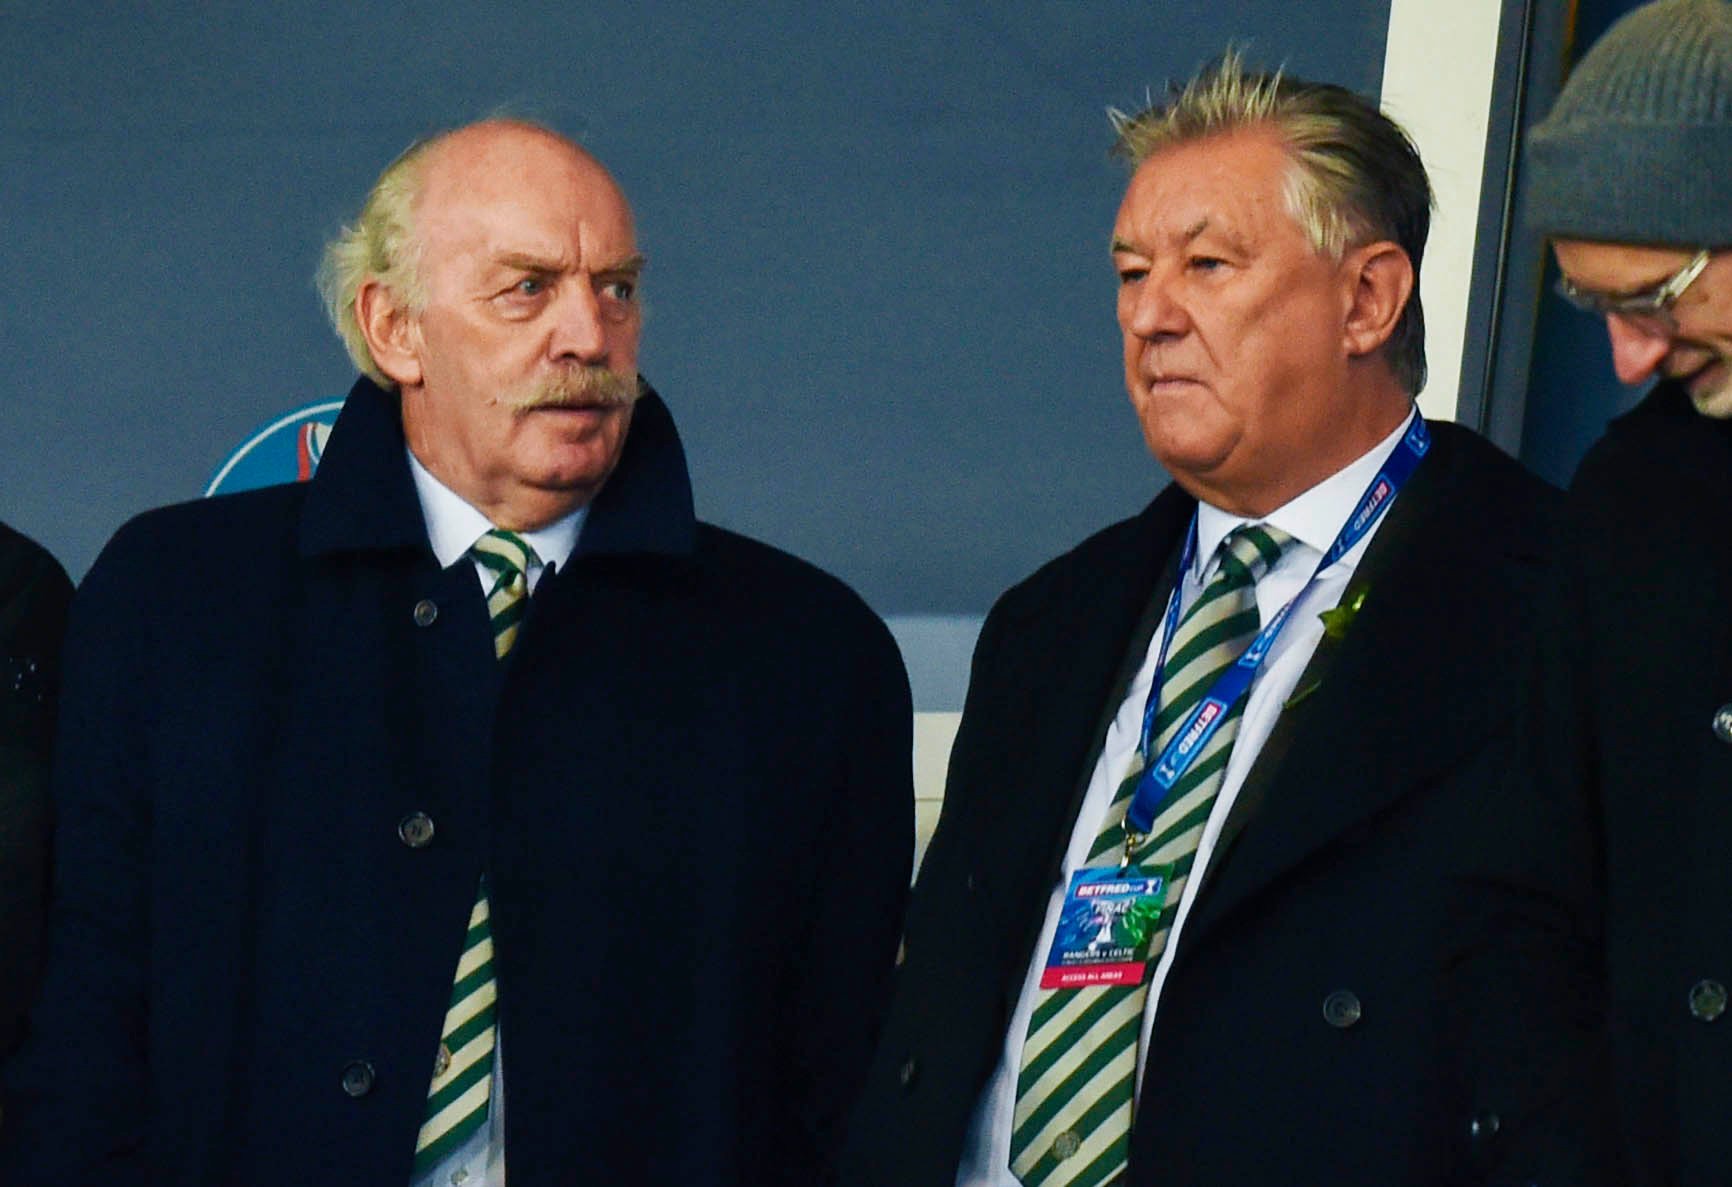 The Celtic board have come under fire for their Dubai decision